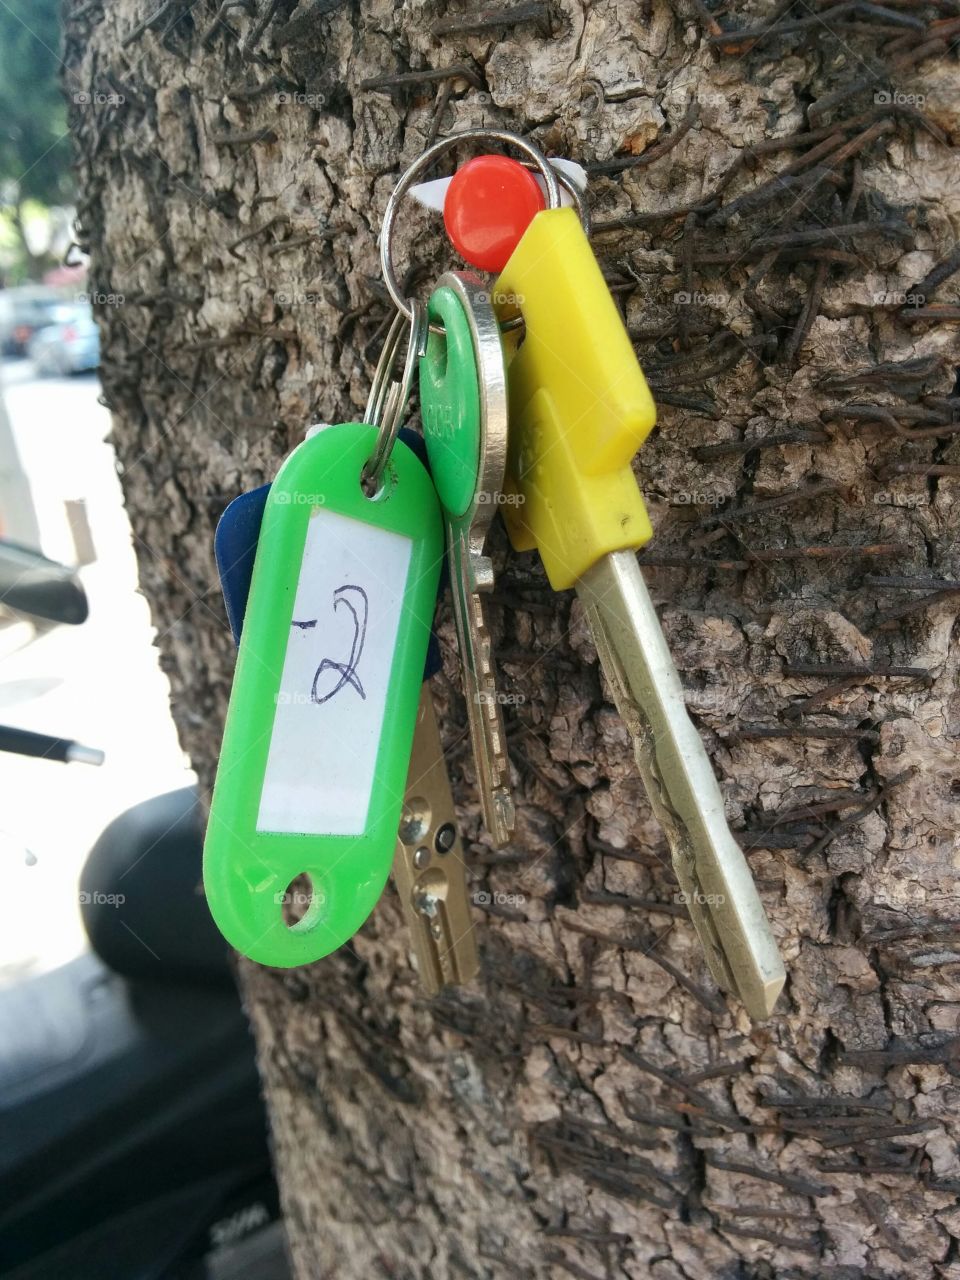 Lost and Found Keys. A set of keys was found on the sidewalk and hung on this tree in the hopes that the owner will find them.